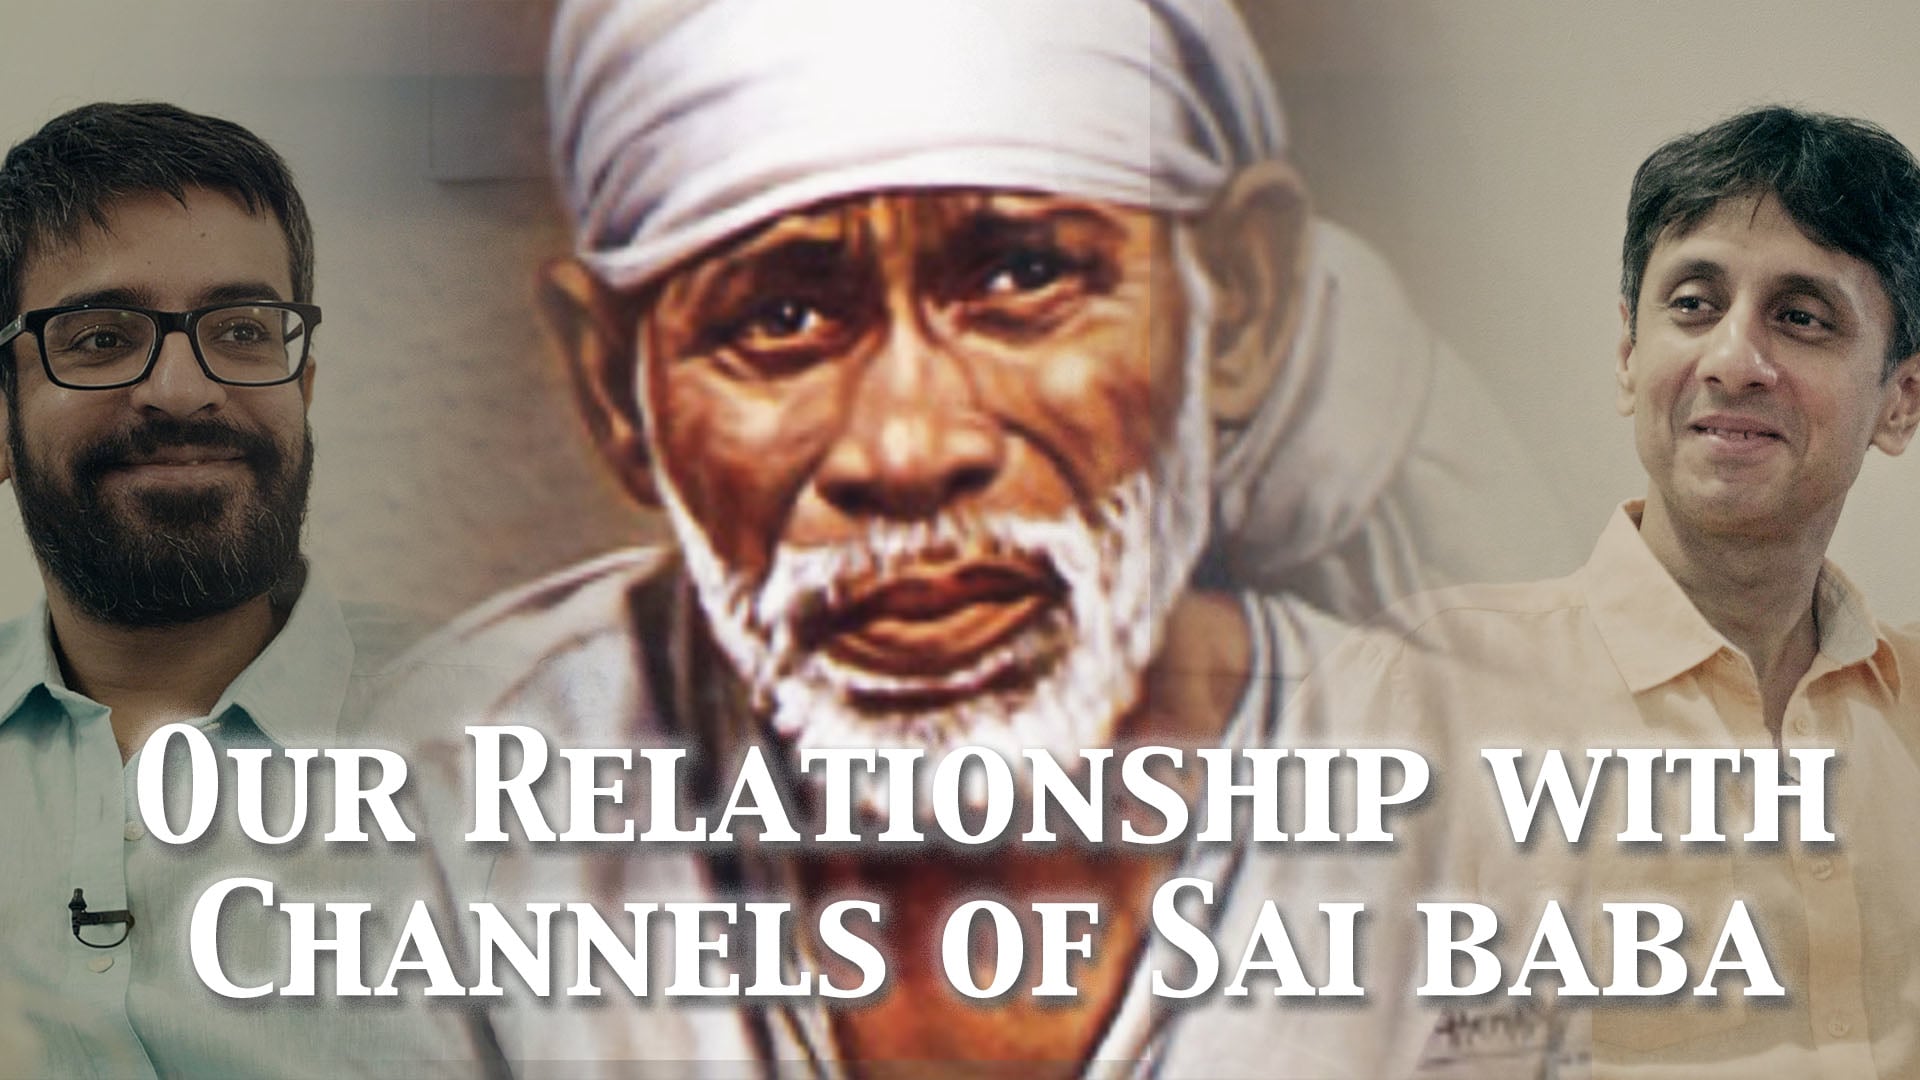 Our relationship with channels of Sai Baba